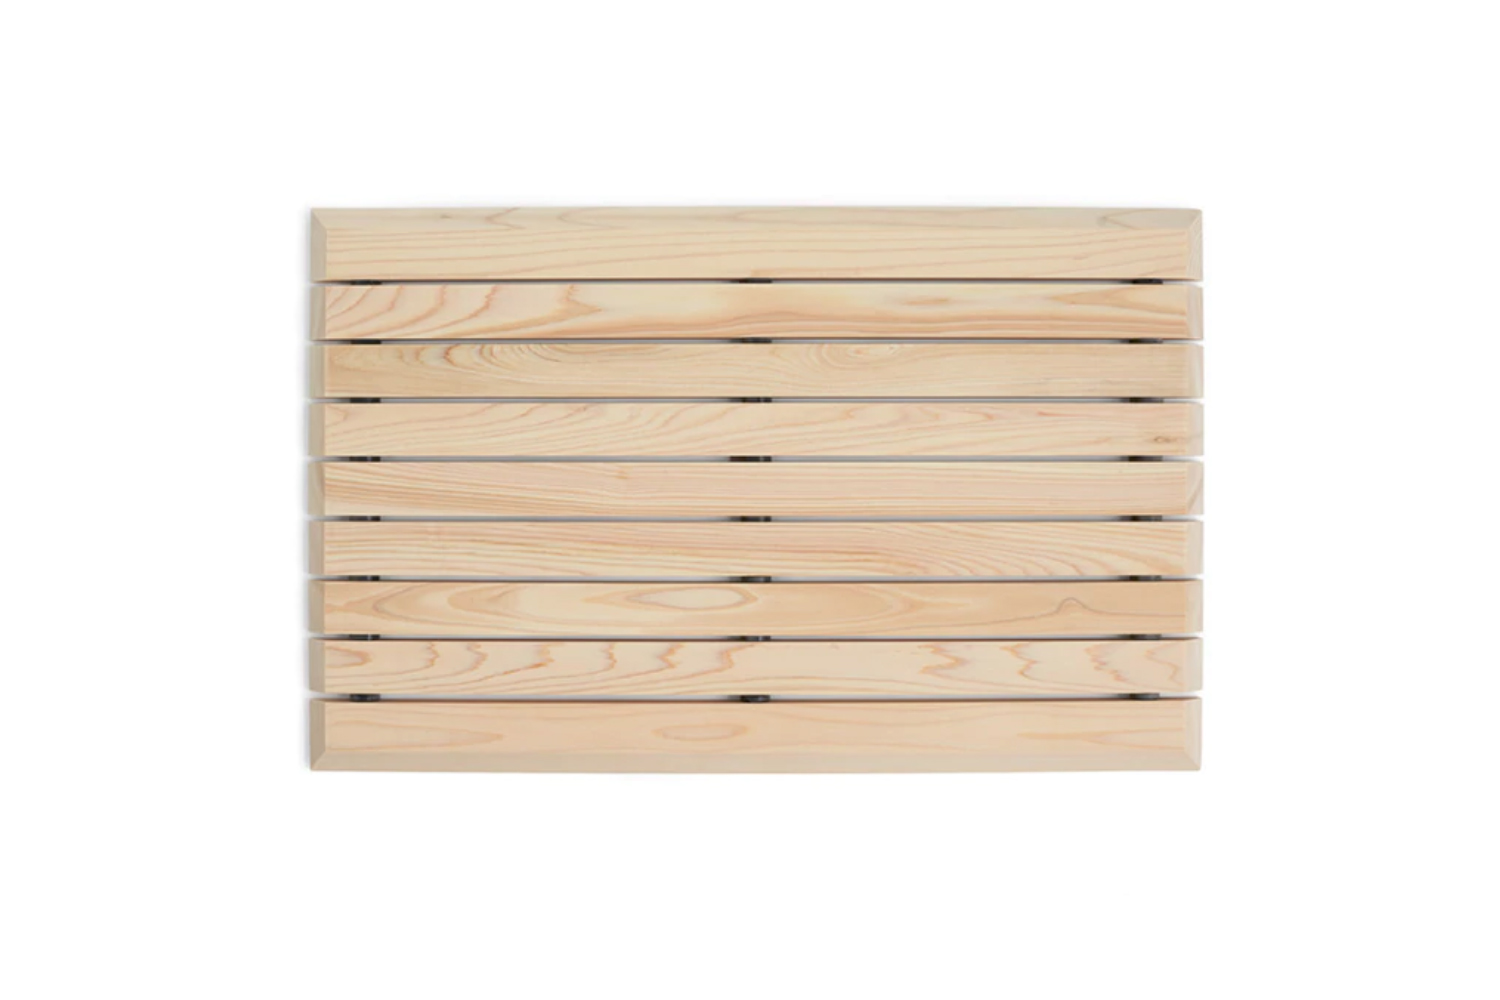 the hinoki bath mat made in kiso, japan by kiso labo features edges cut at an a 13